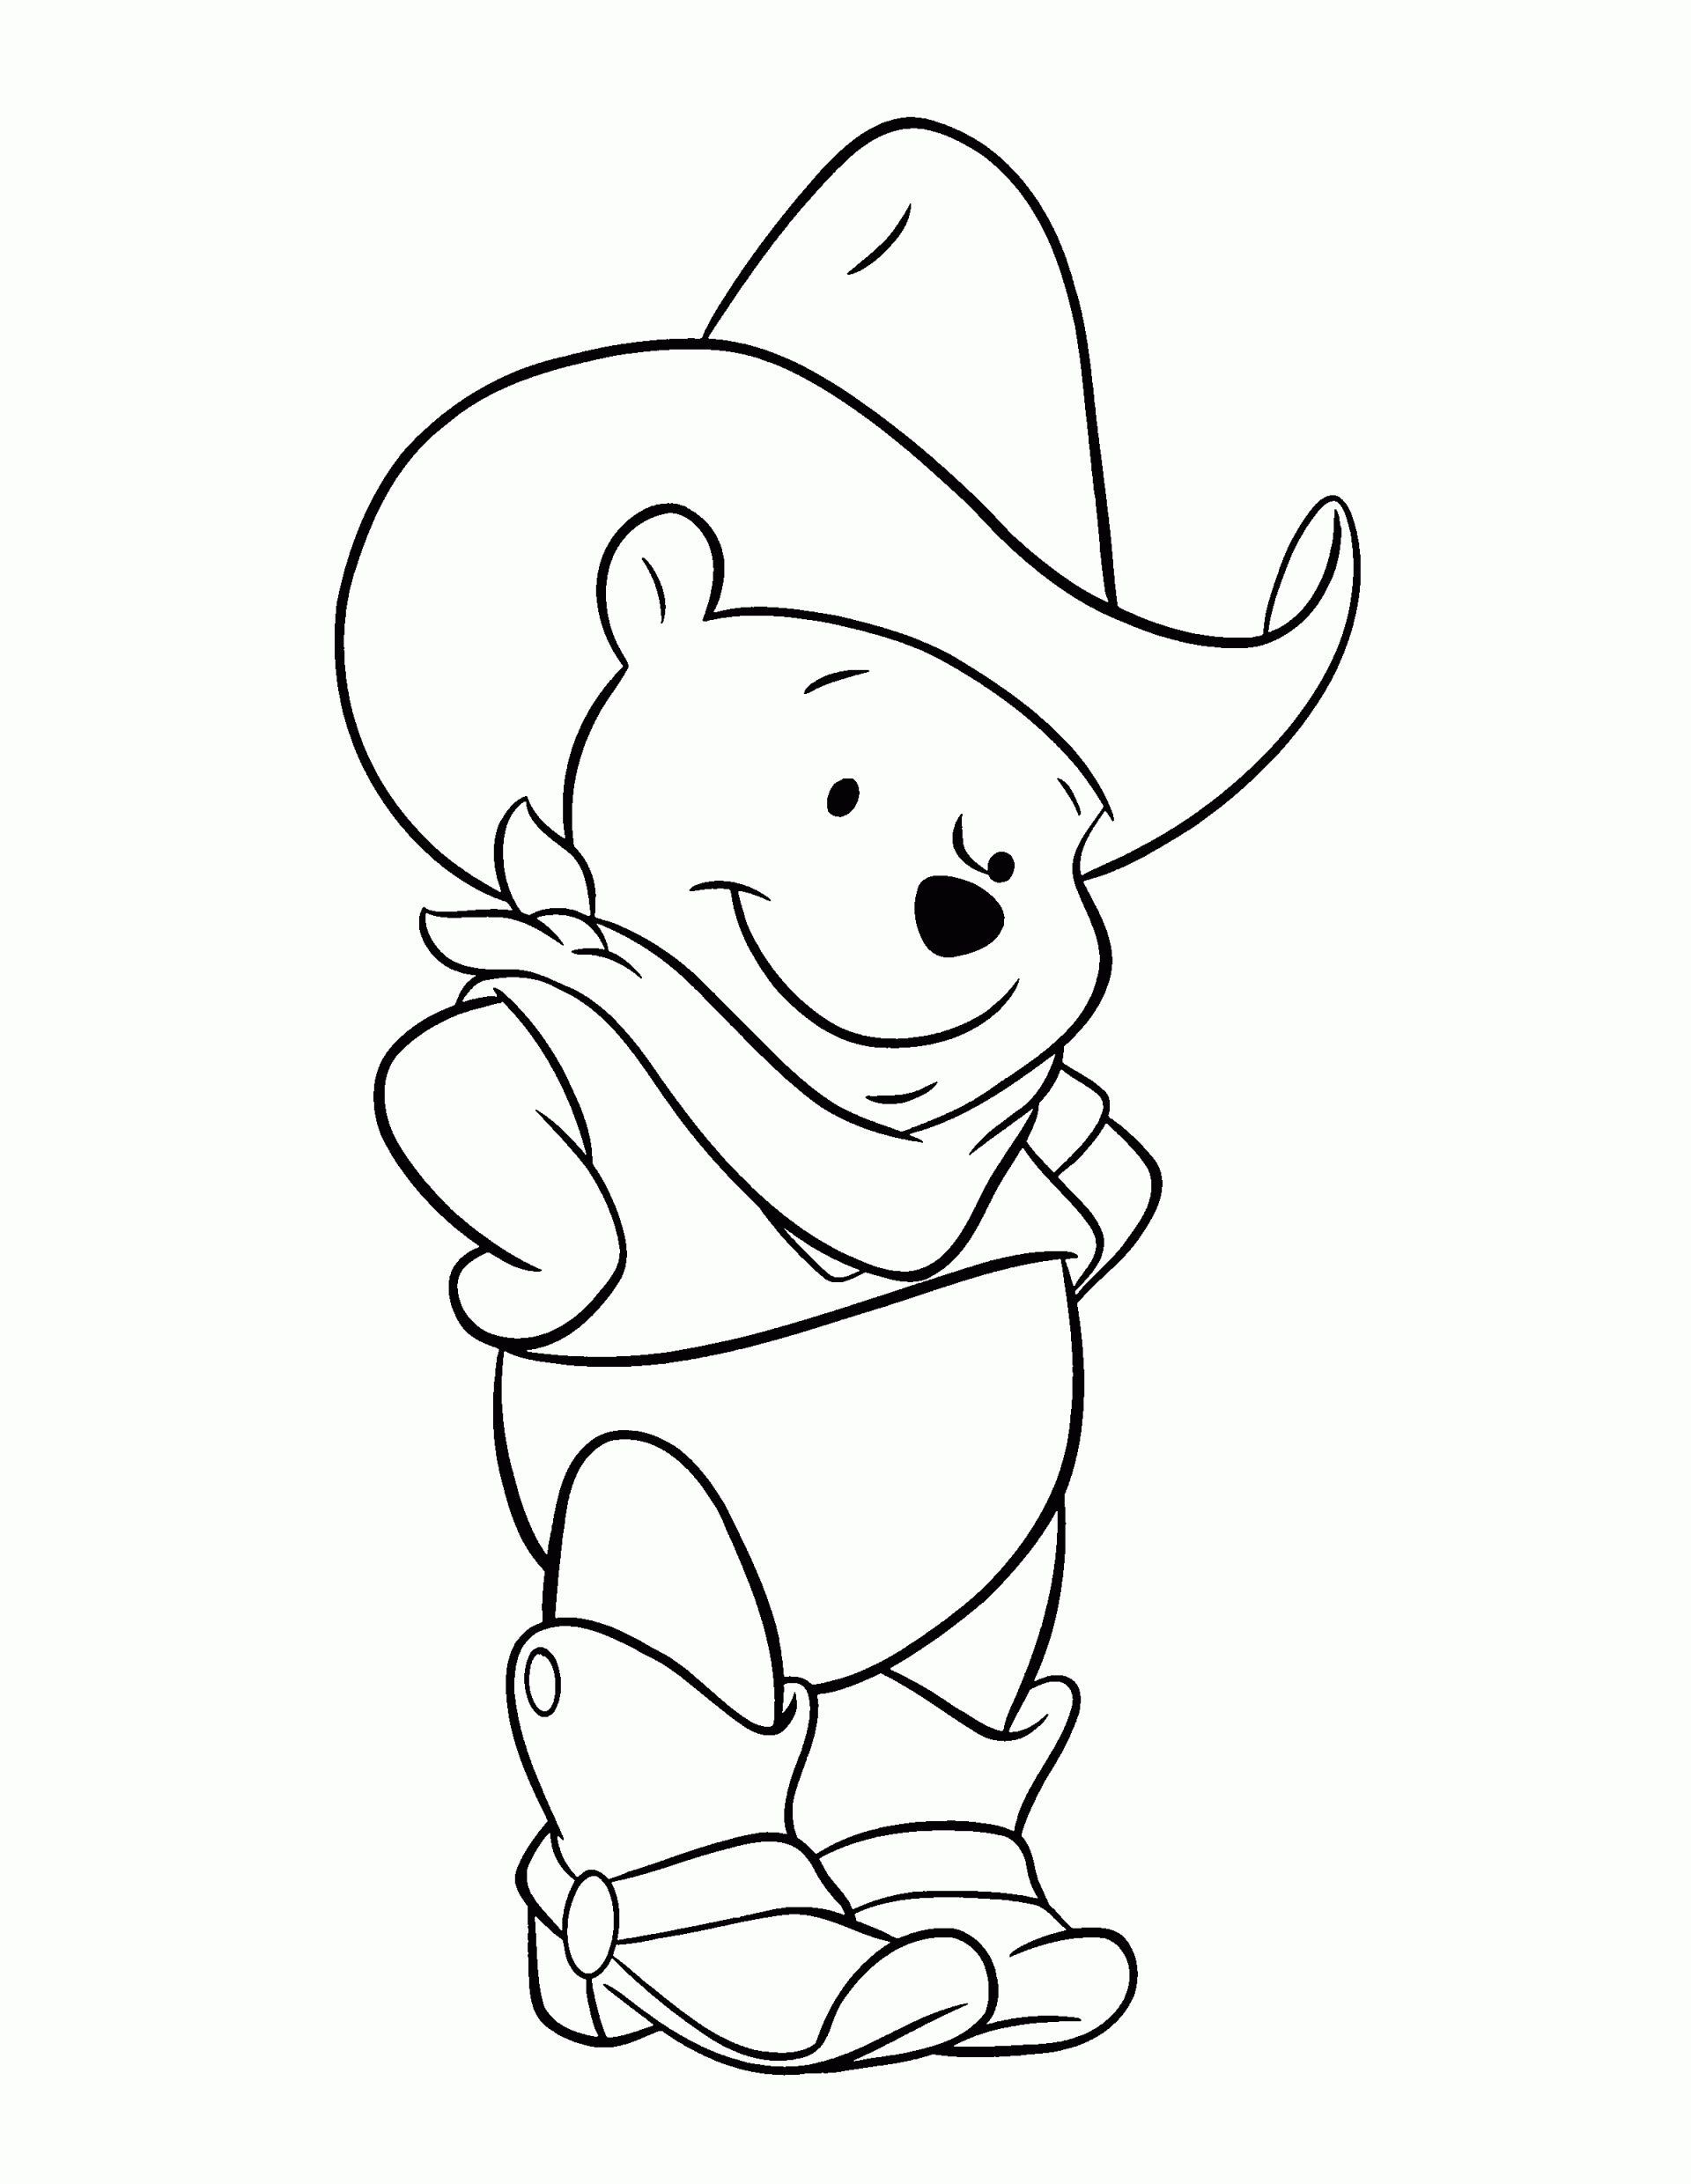 Cute Cartoon Characters Coloring Pages - Coloring Page Photos